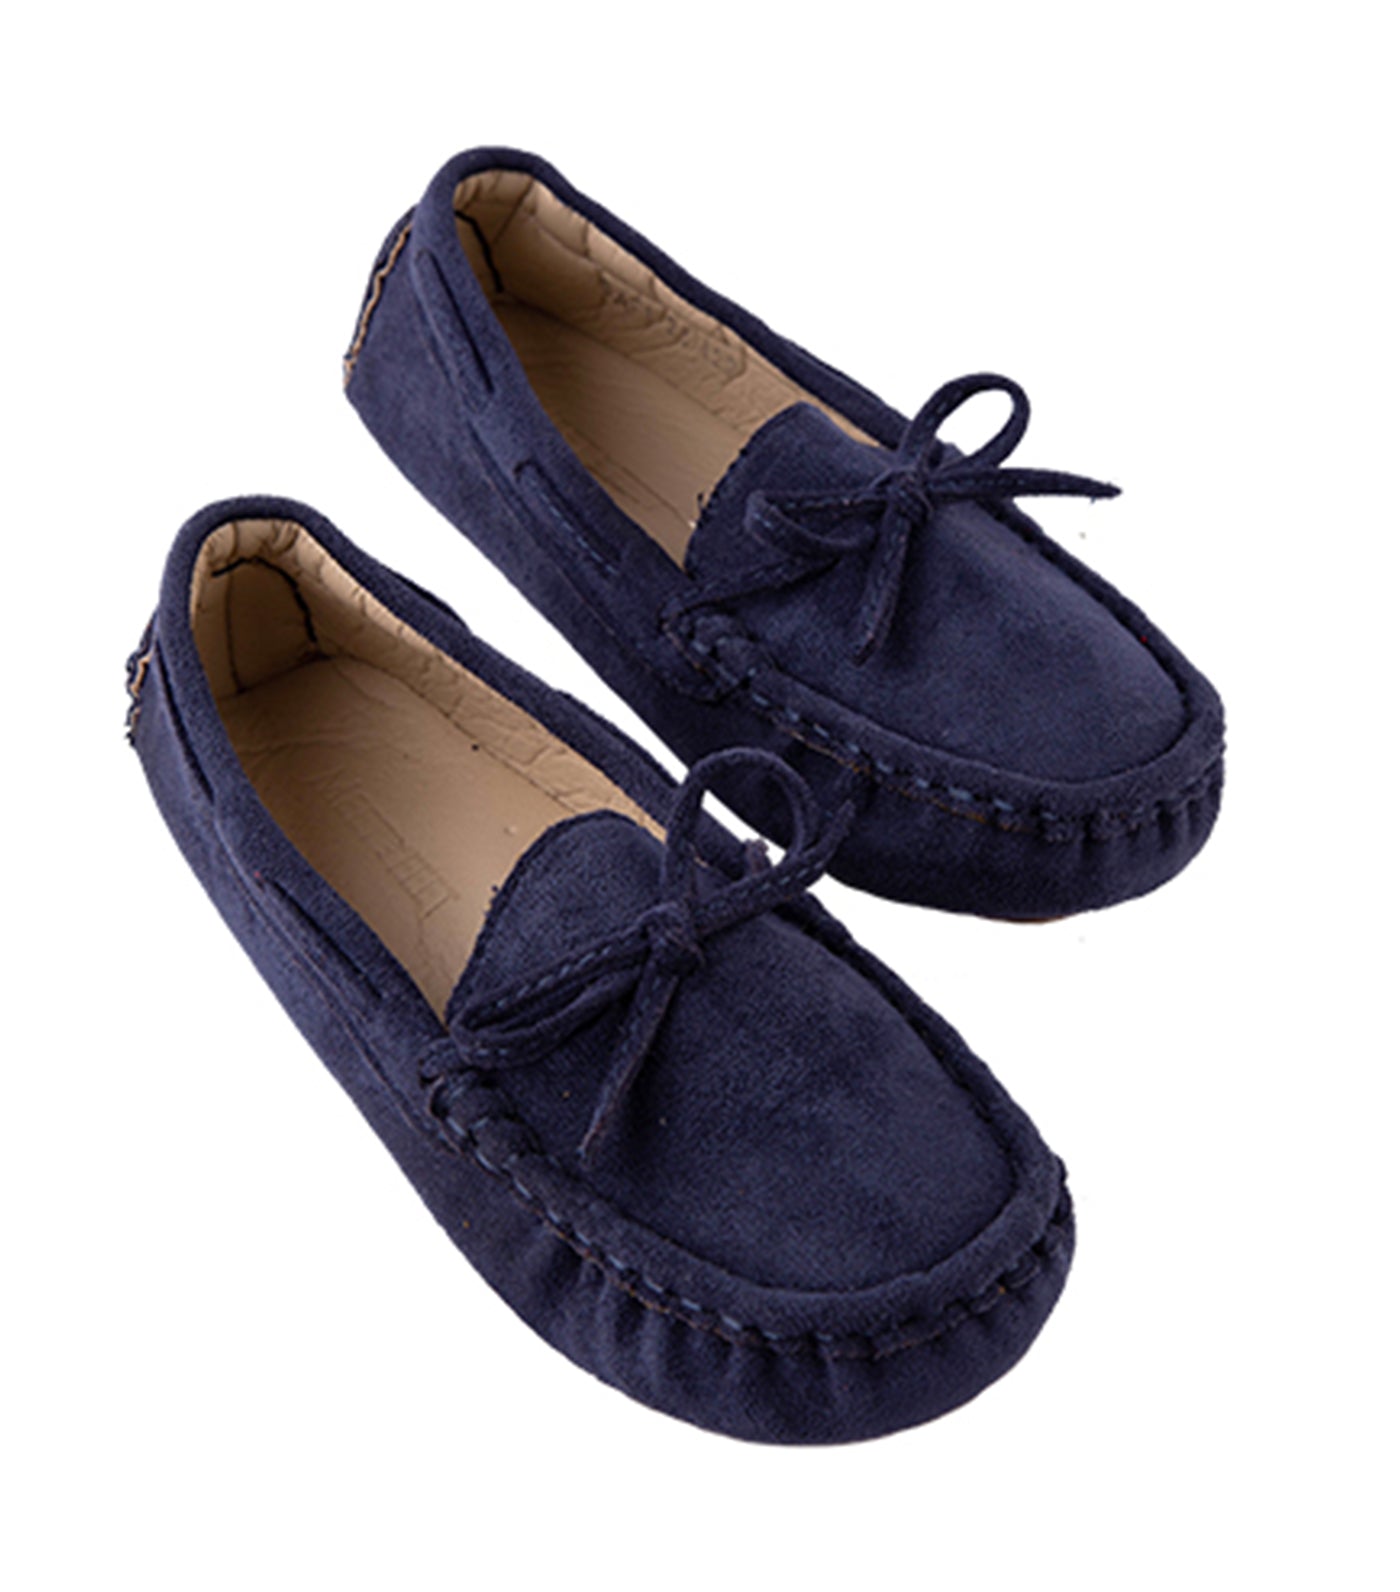 Safi Loafers for Boys - Navy Blue